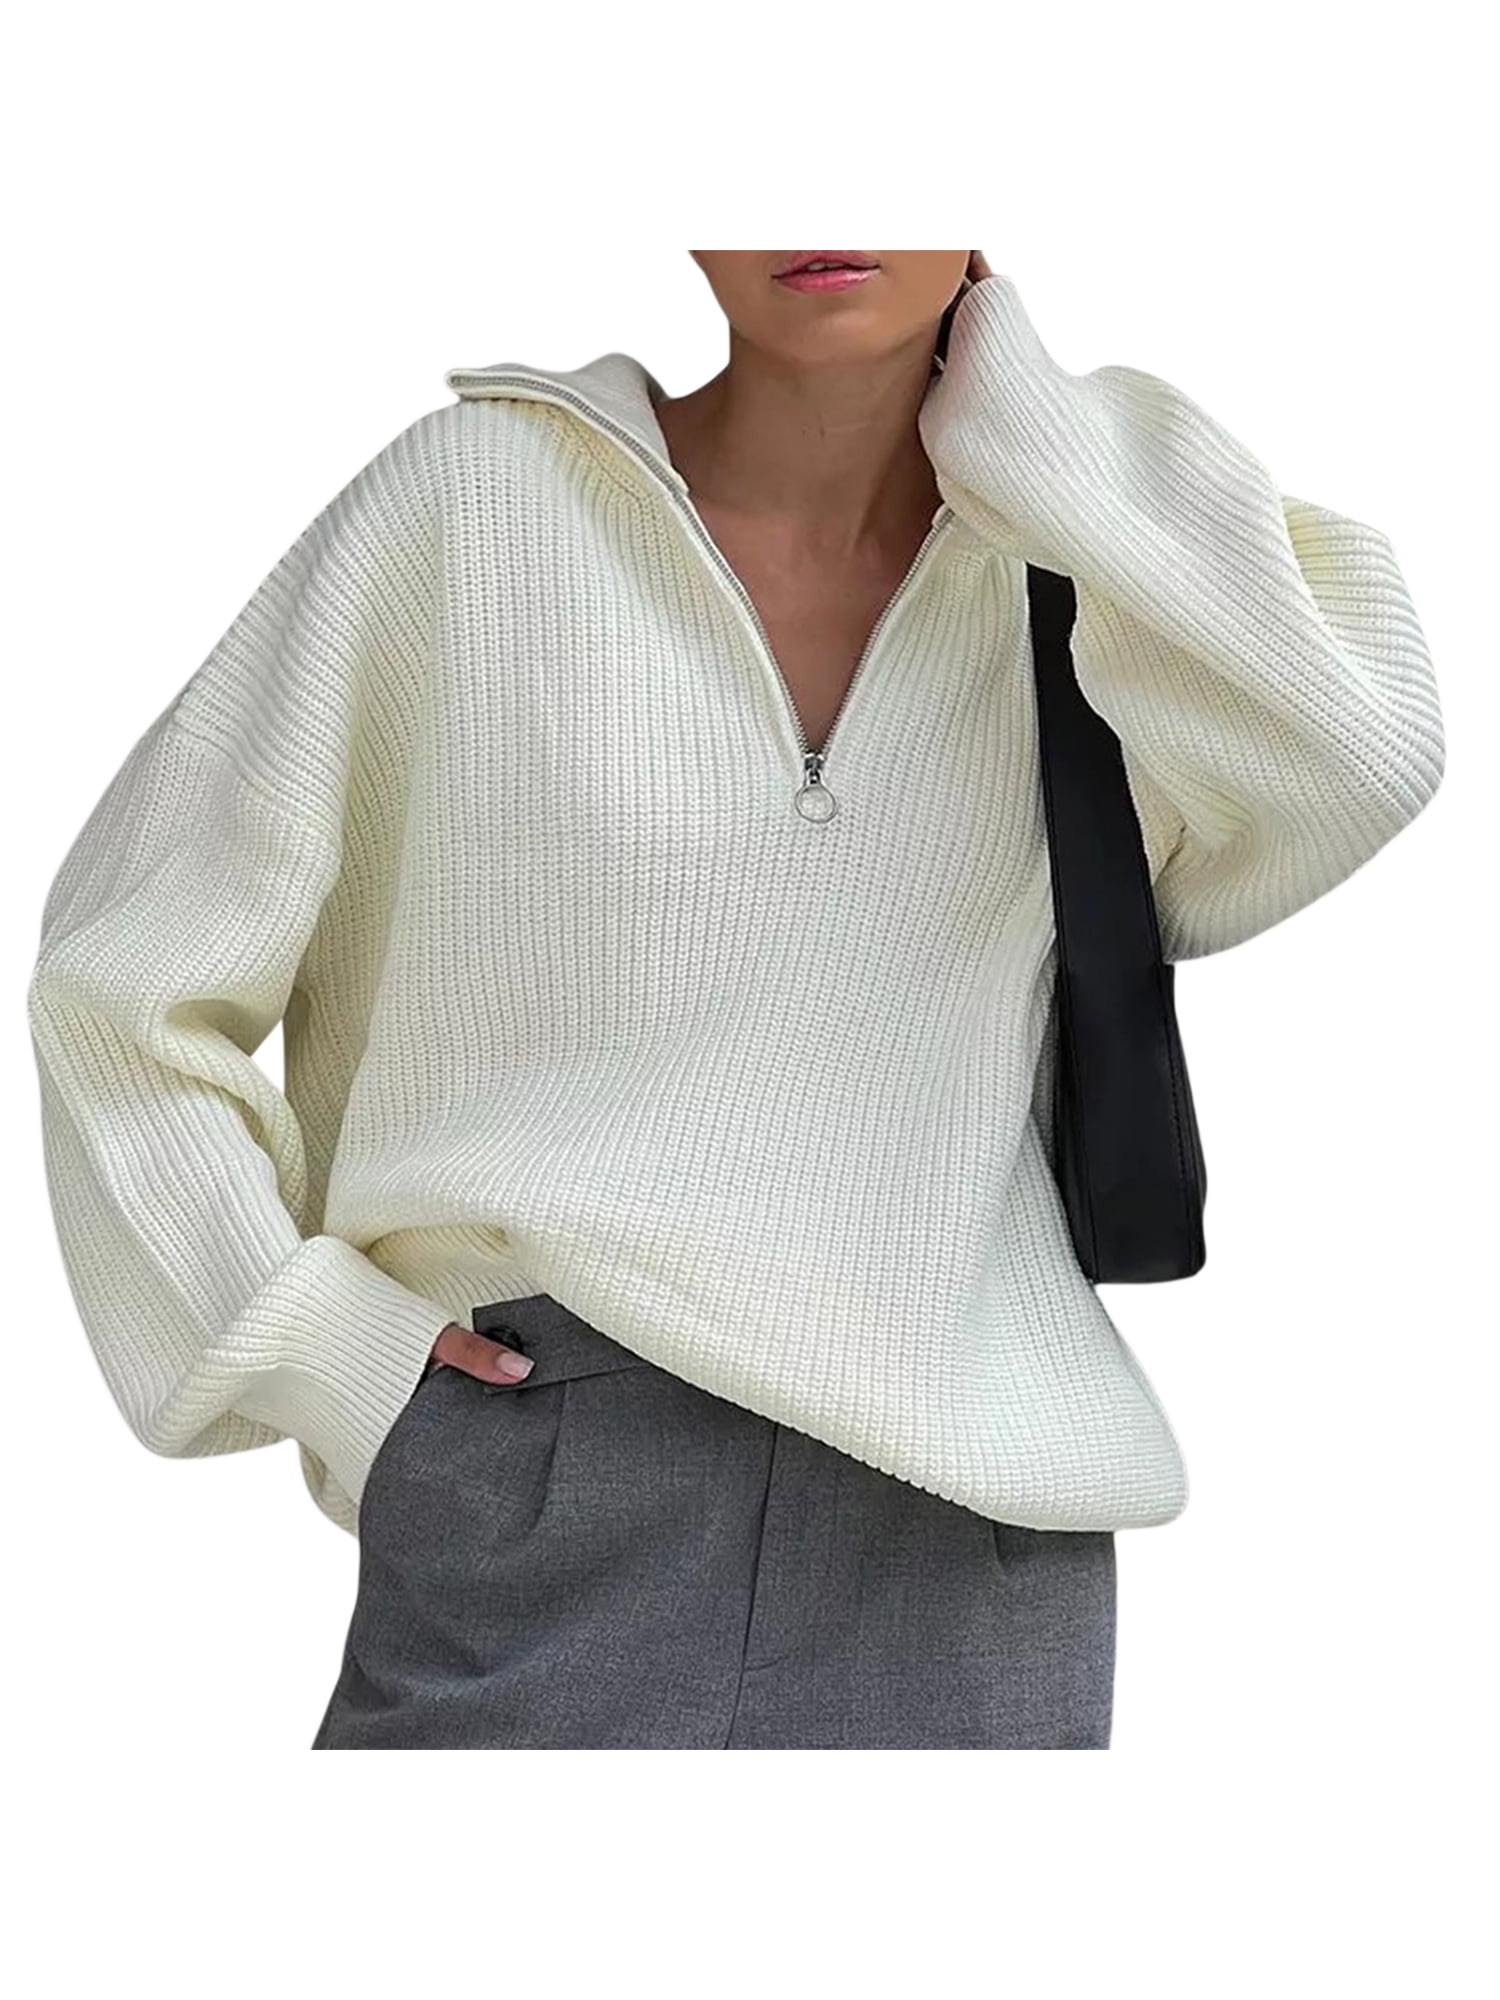 AMILIEe Women Long Sleeve Lapel Collar Sweaters V-Neck Pullover Knitwear  Ribbed Knit Jumper Tops